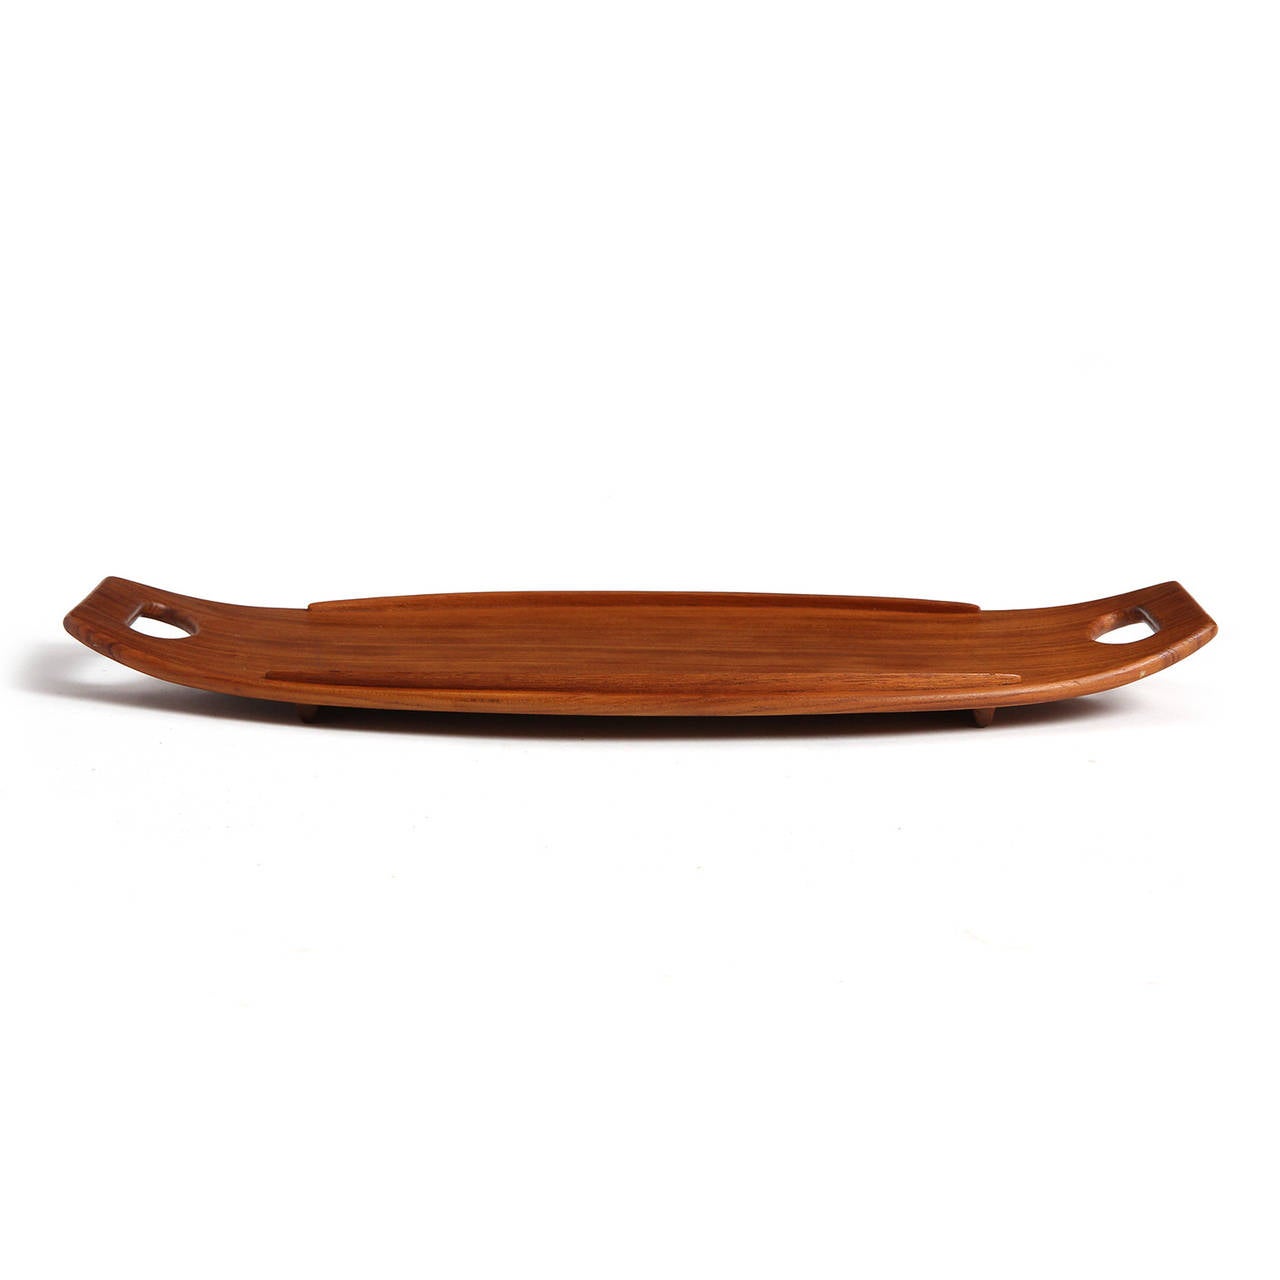 An oblong, wood railed serving tray with upturned ends and cut out handles made from staved planks.